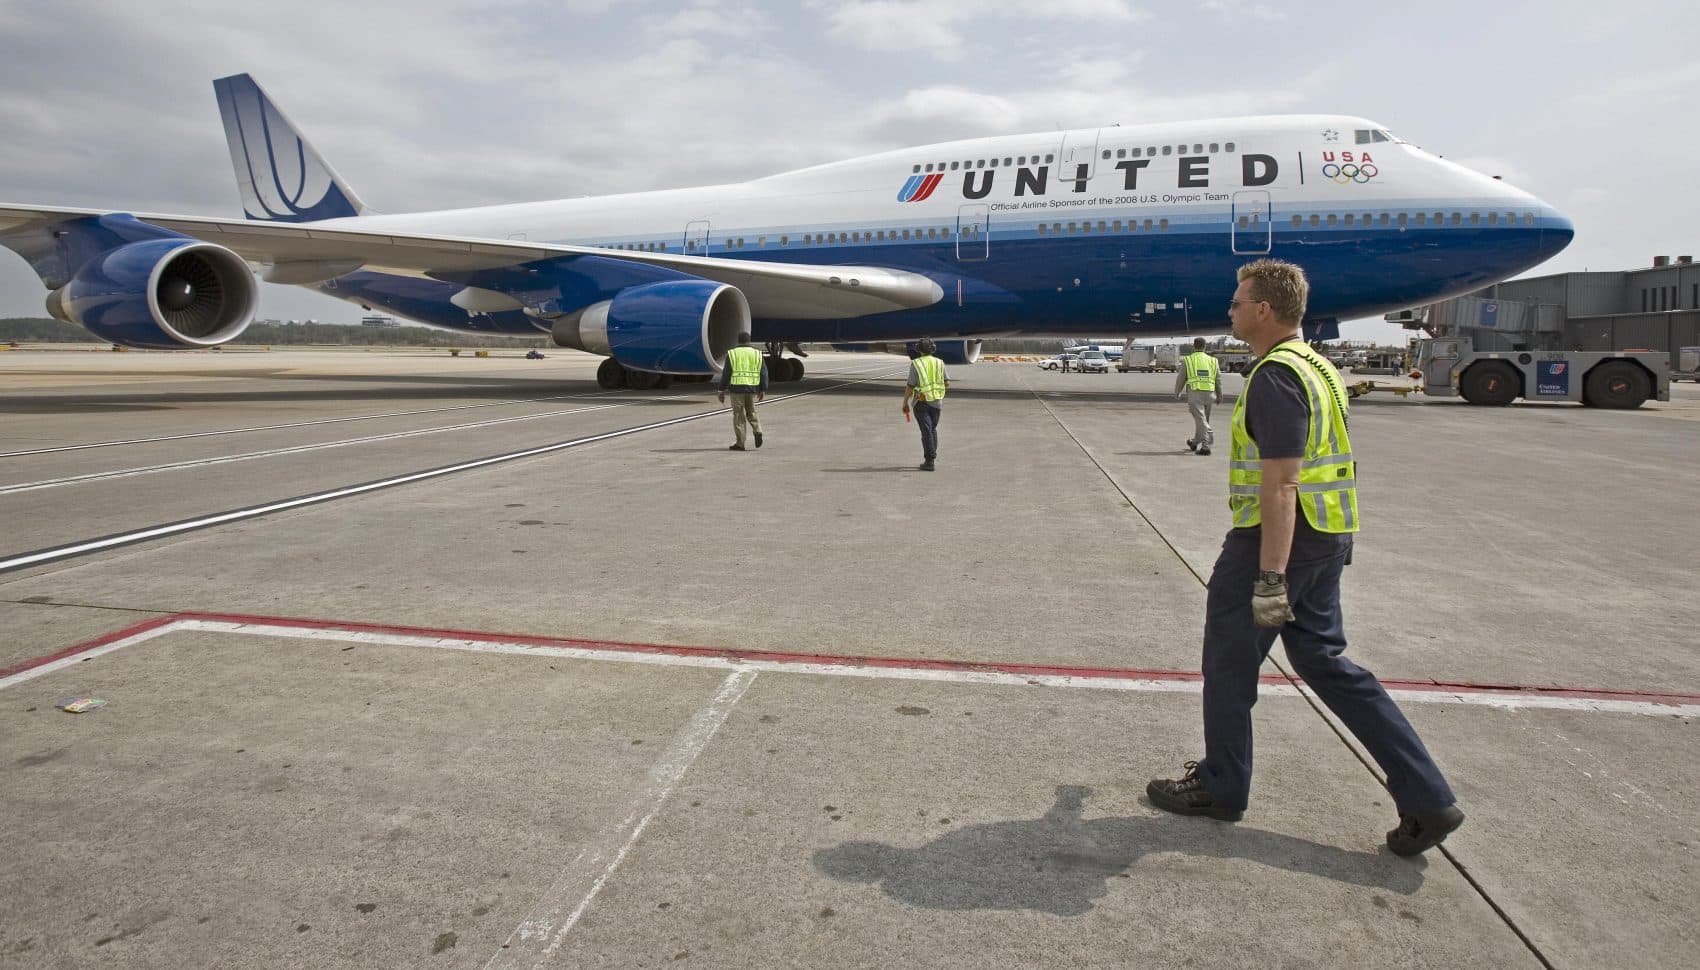 United Airlines flight #897, a Boeing 747, at Washington's Dulles International Airport waits for it's maiden non-stop 13-hour flight from Washington to Beijing on March 28, 2007. (Paul J. Richards/AFP/Getty Images)